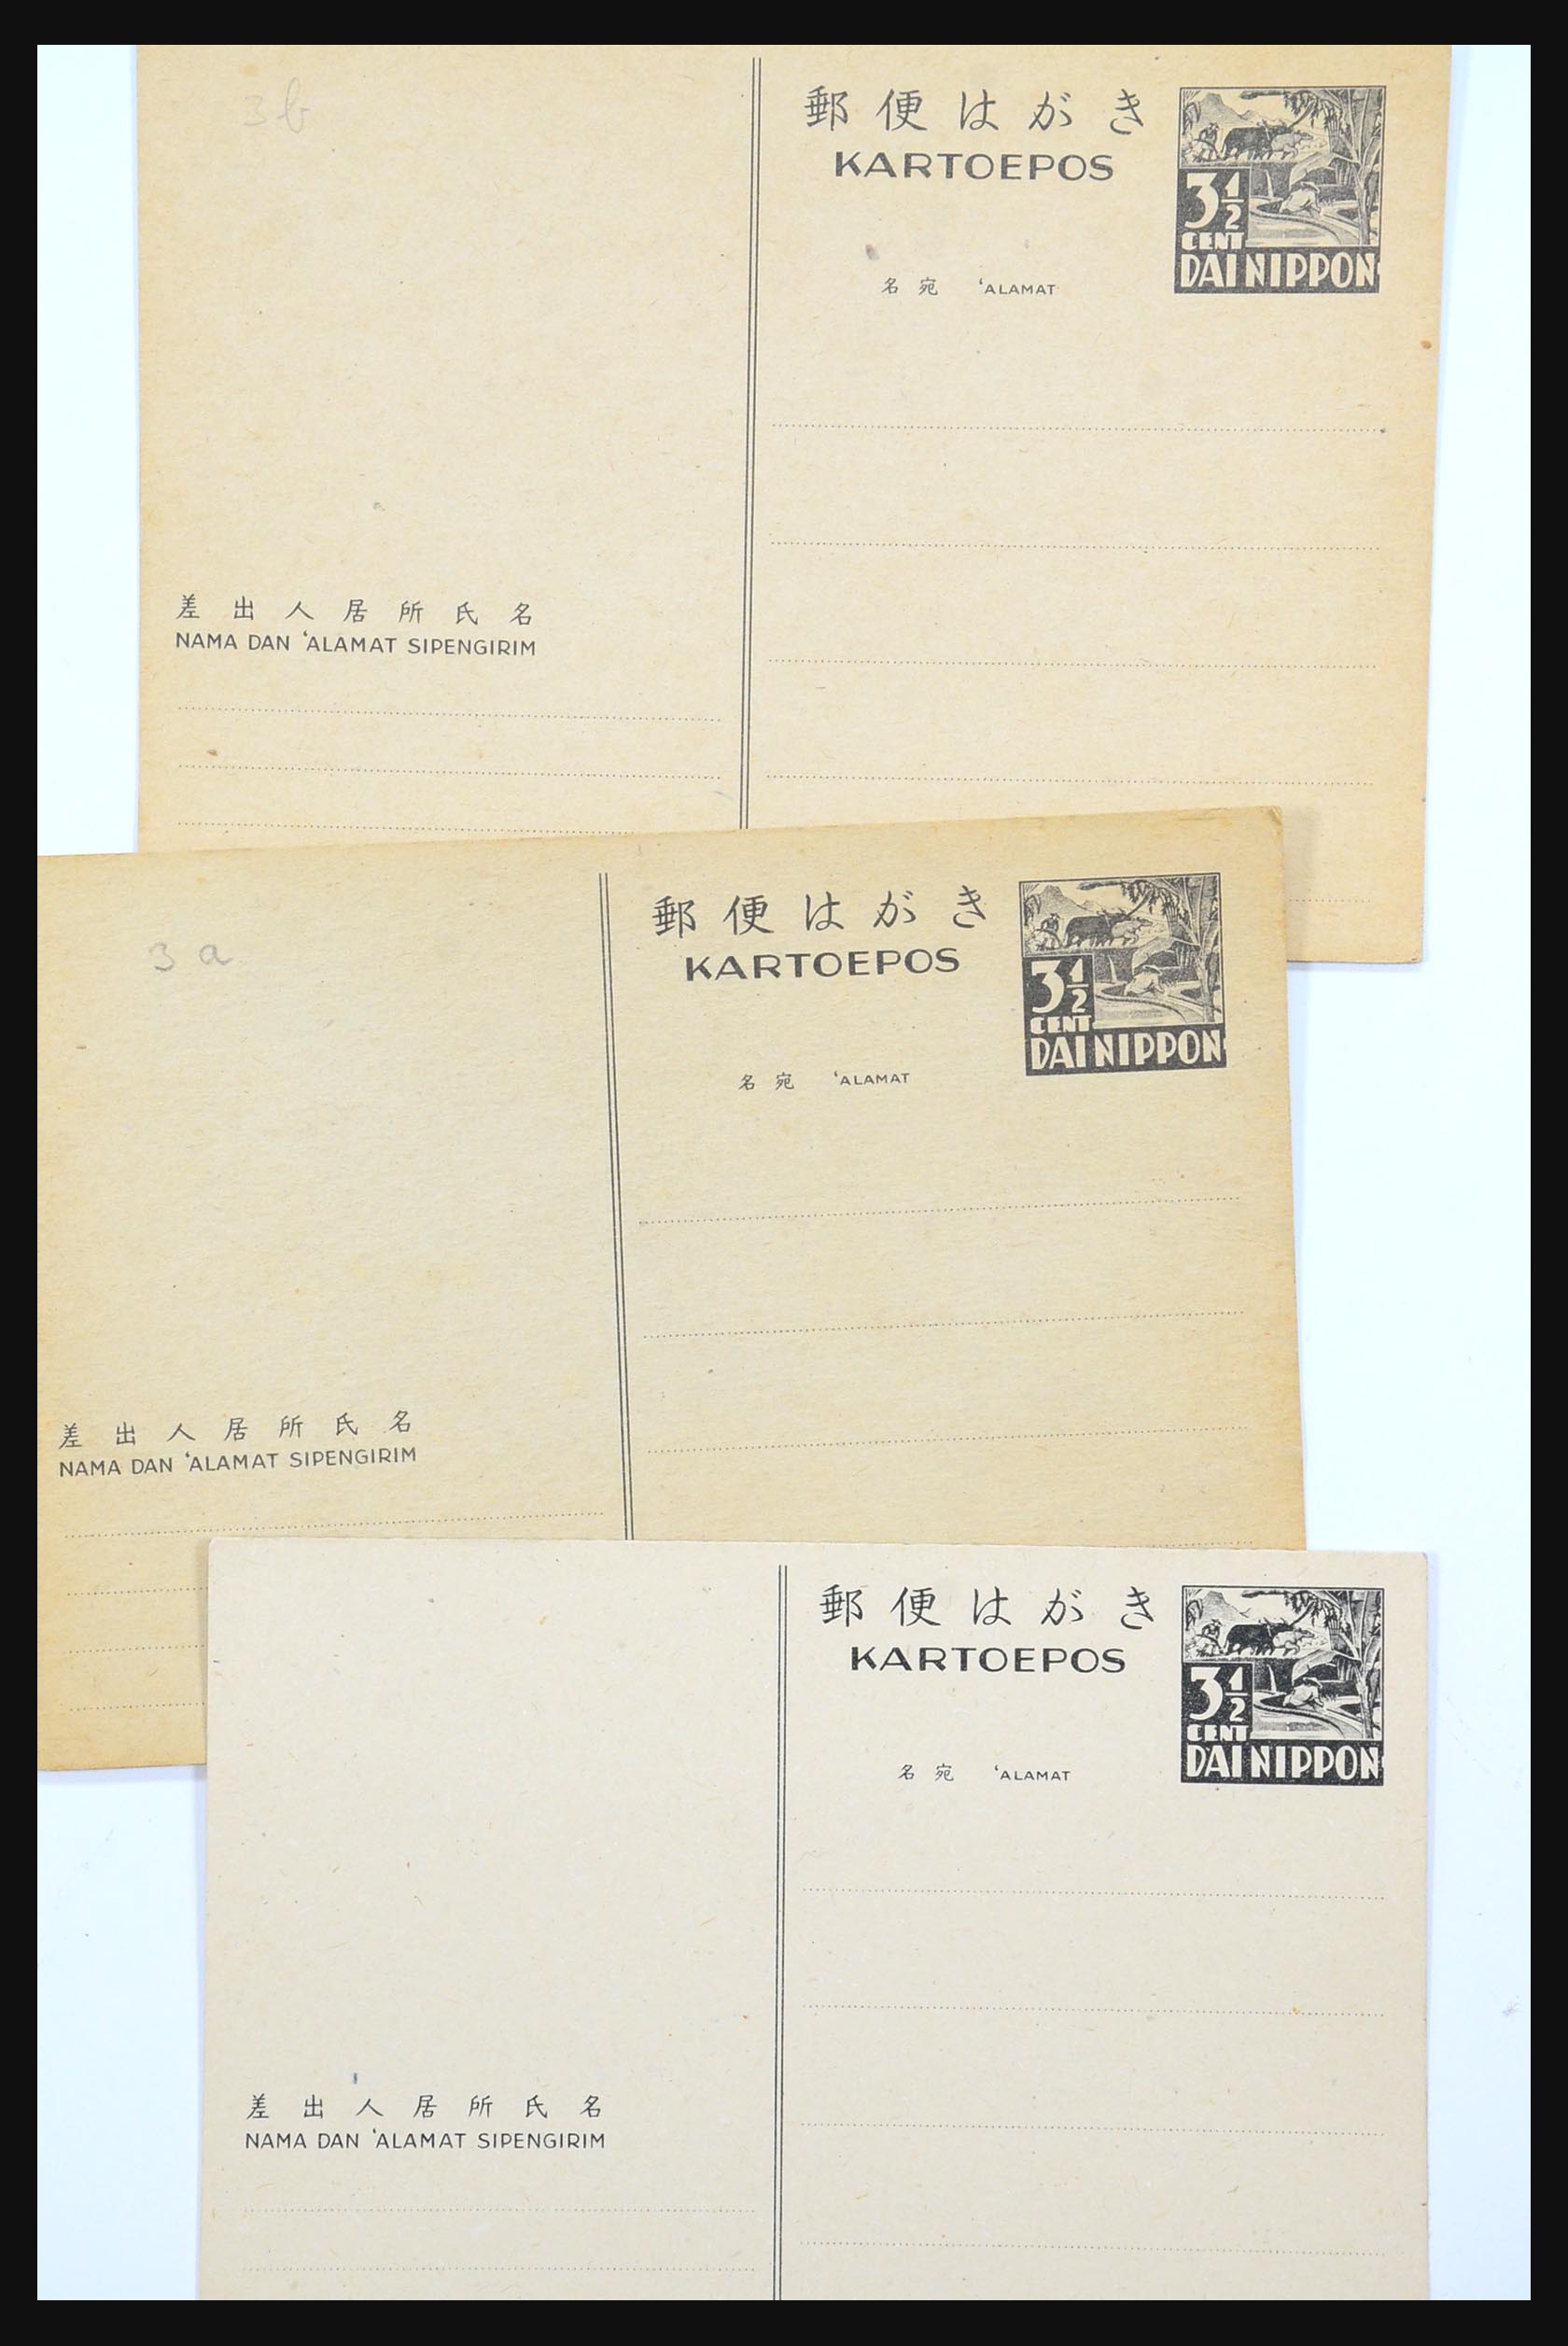 31362 059 - 31362 Netherlands Indies Japanese occupation covers 1942-1945.